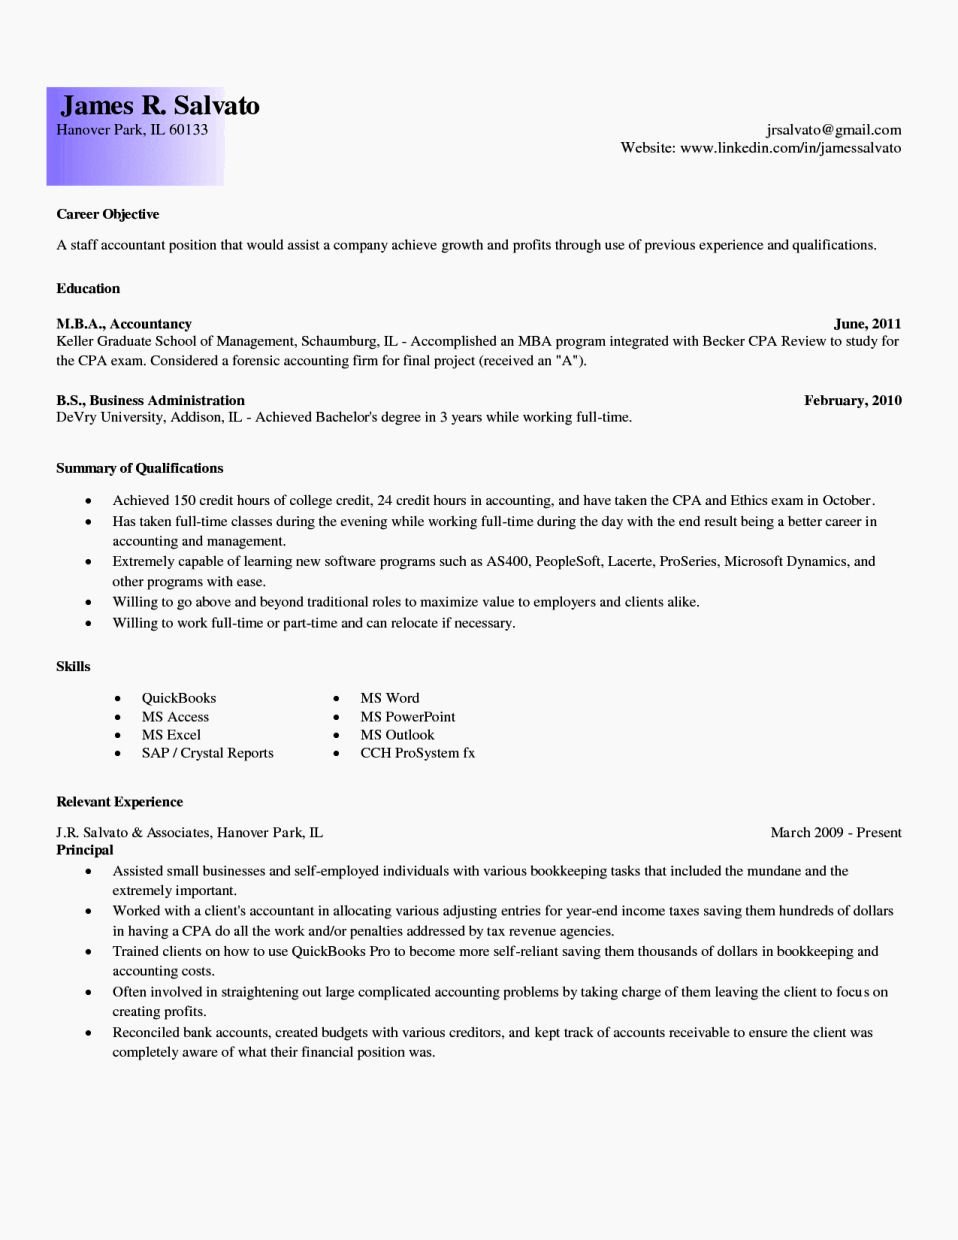 Entry Level Accountant Resume Samples